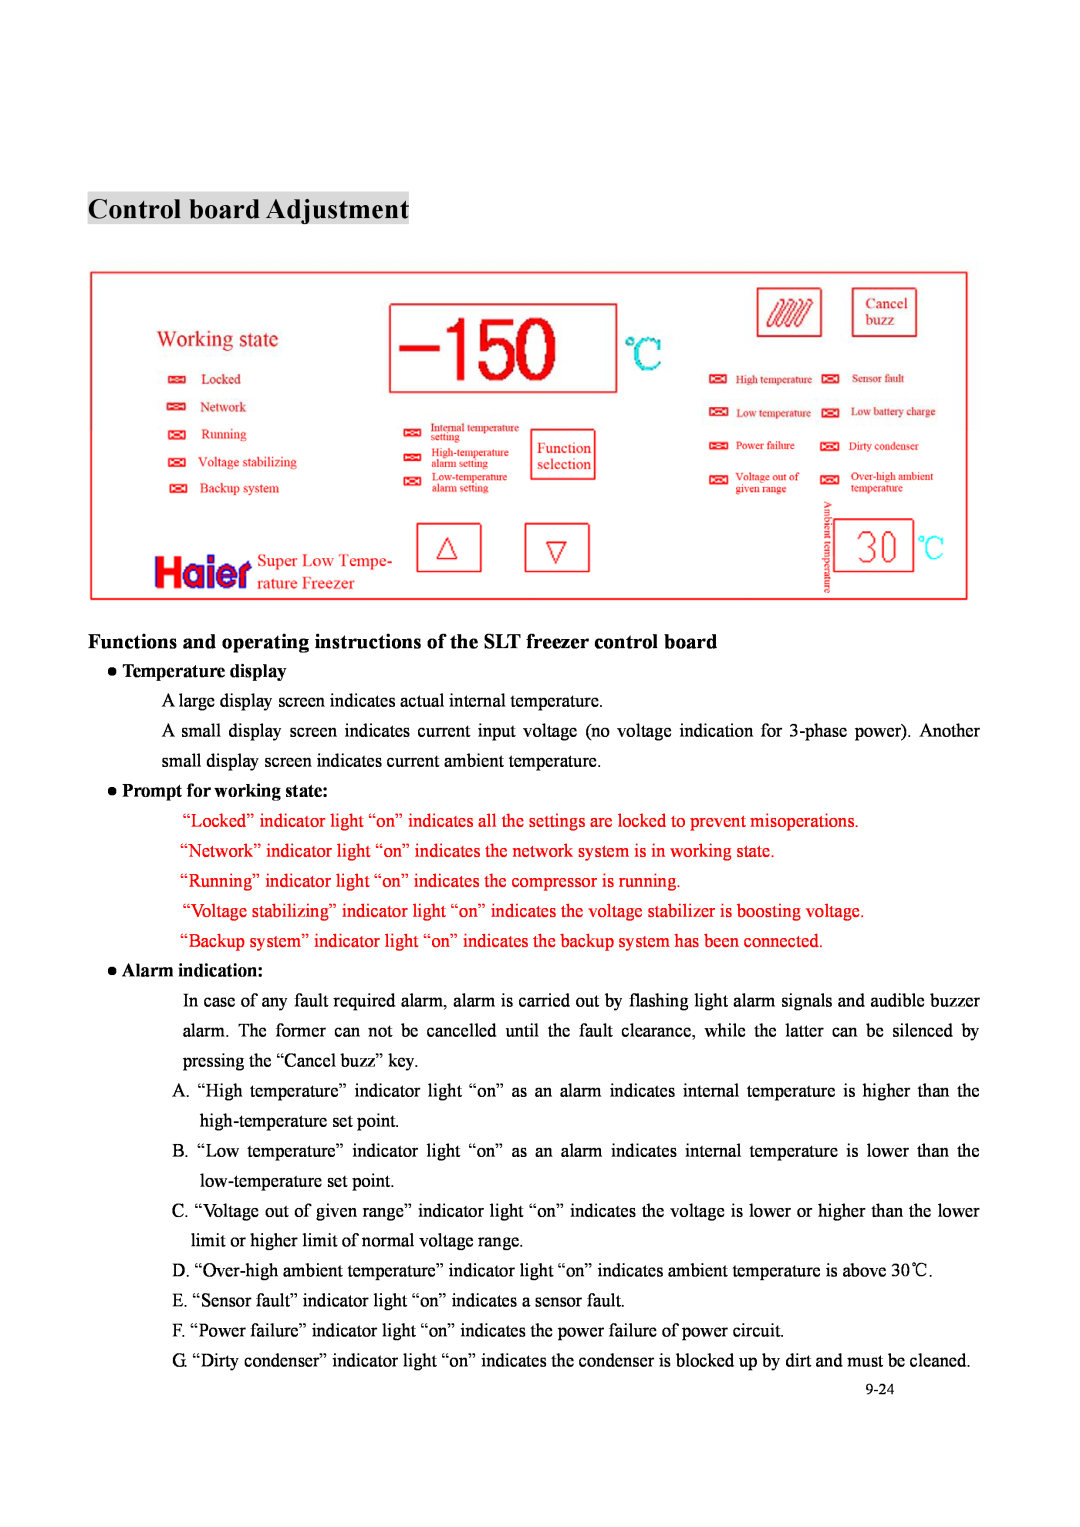 Haier DW-150W200 operation manual Control board Adjustment, Temperature display, Prompt for working state, Alarm indication 